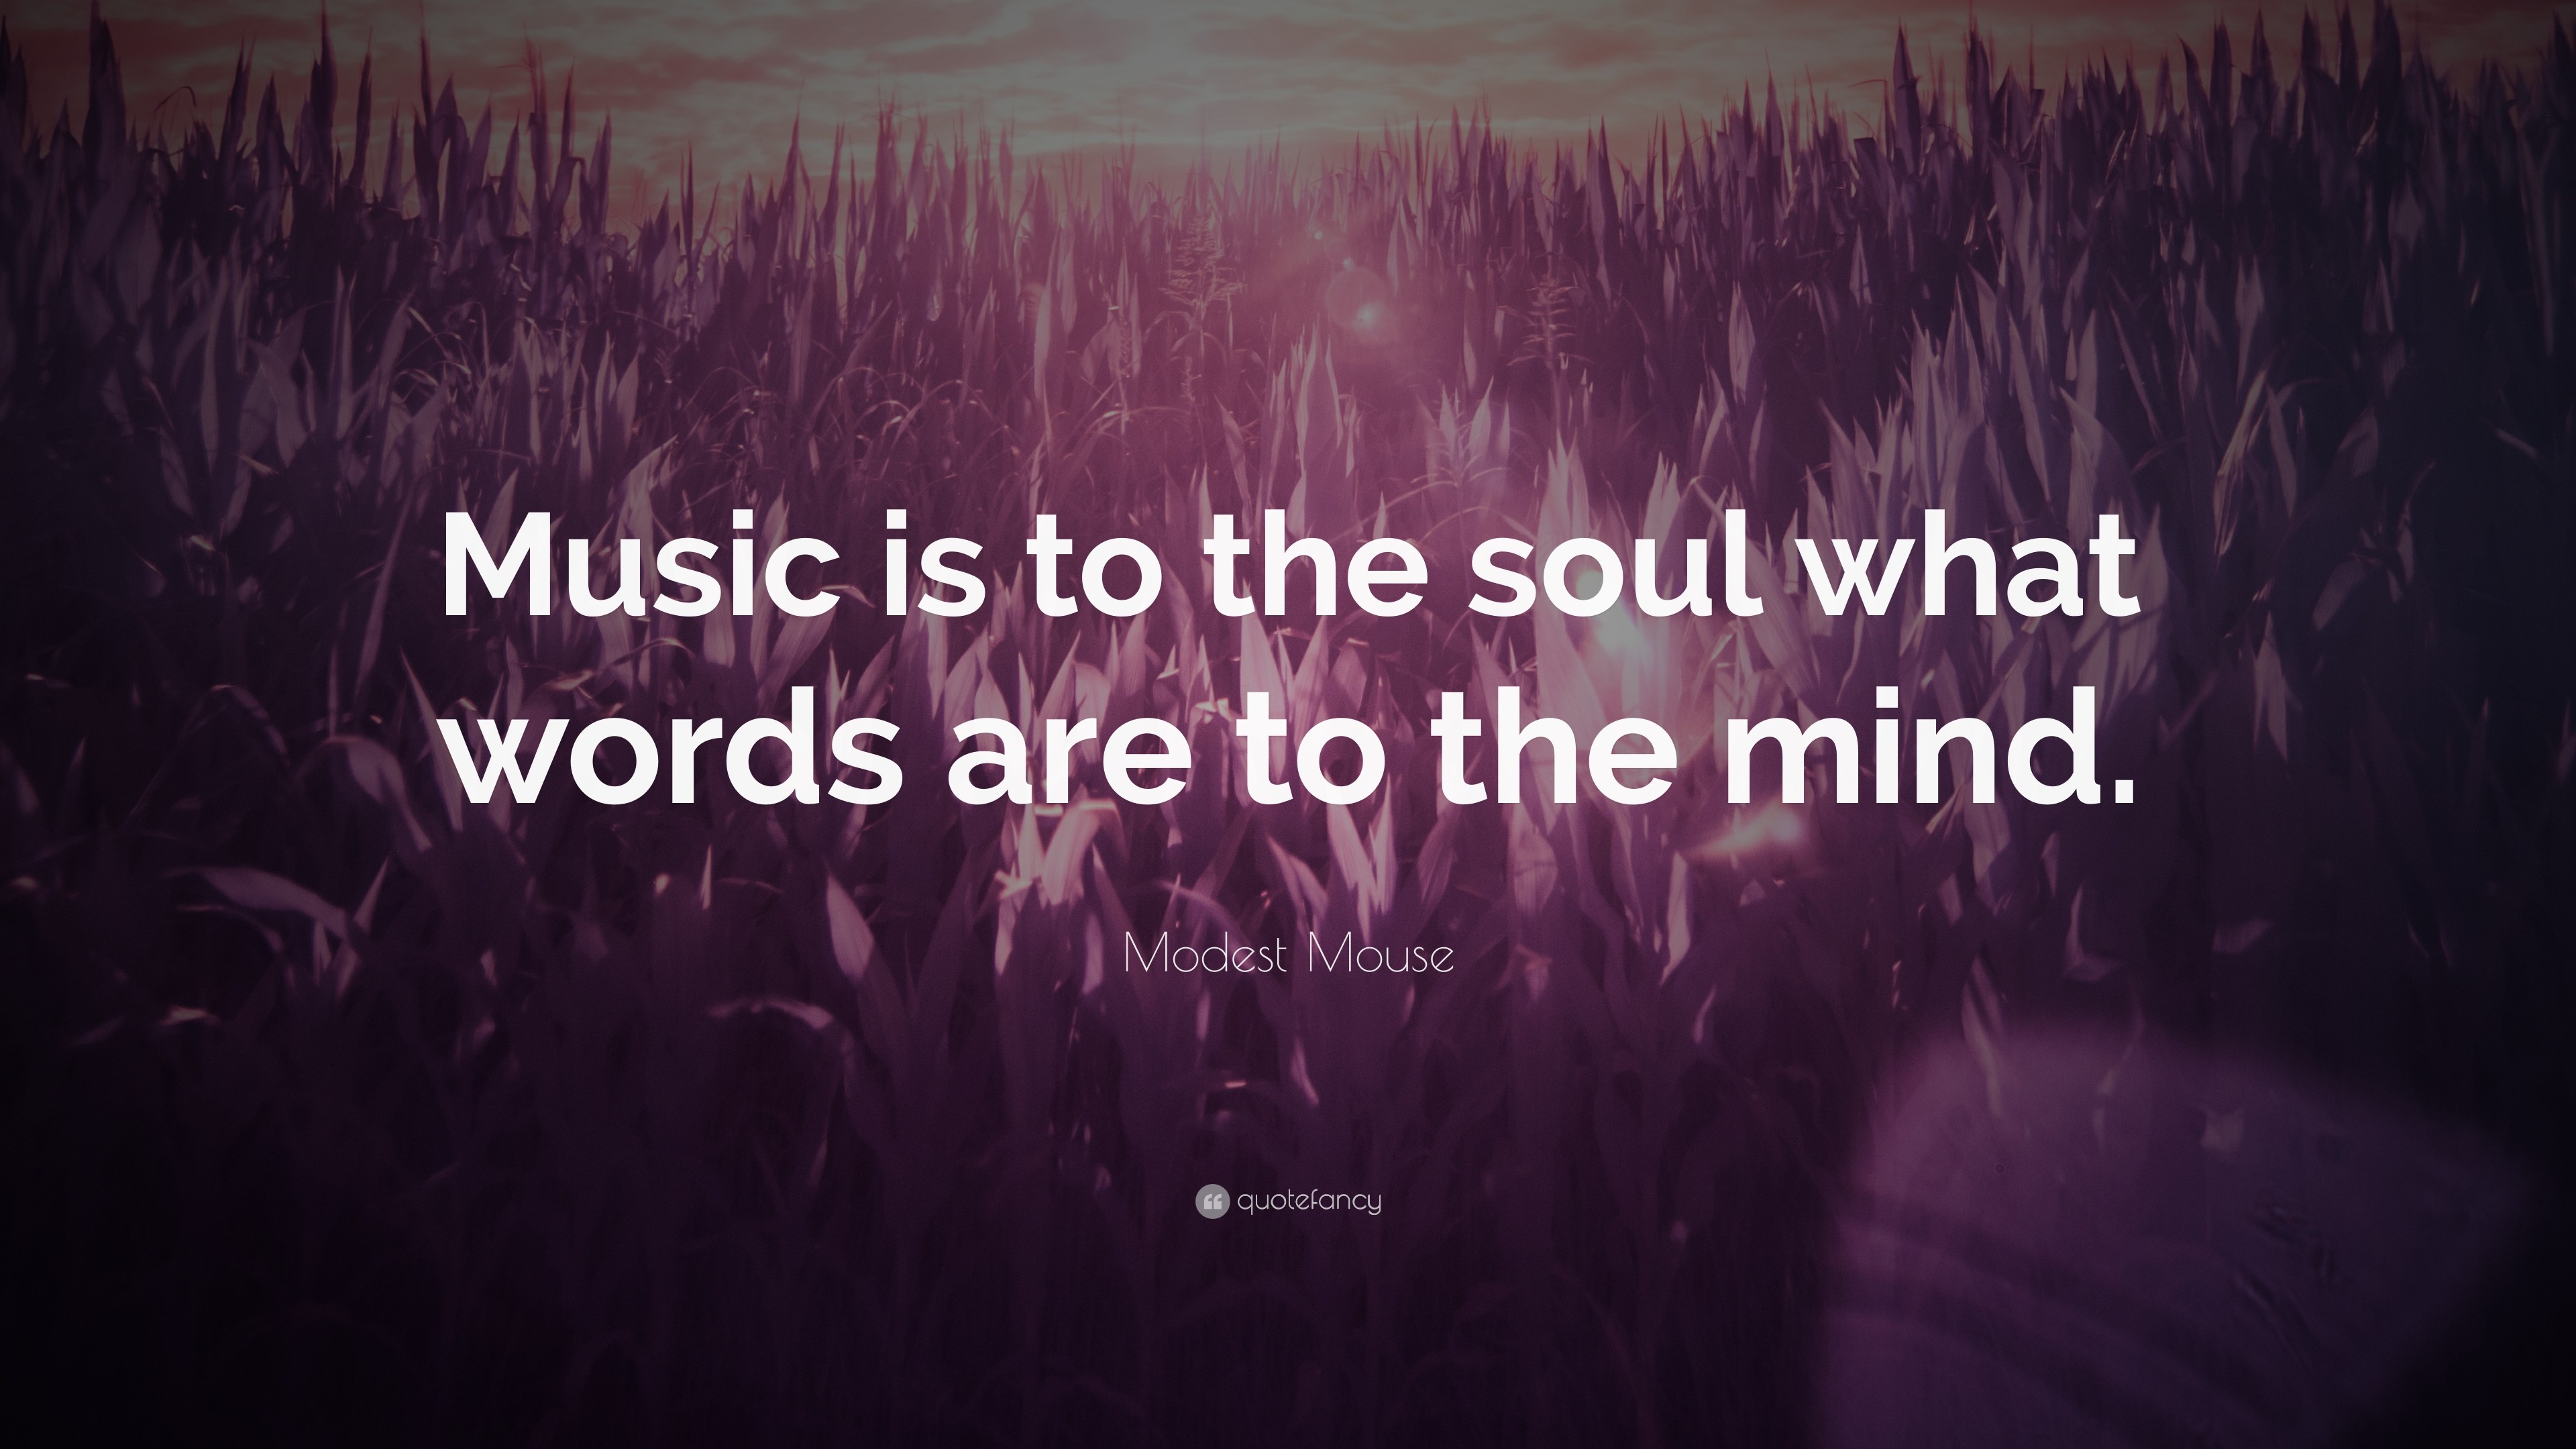 3840x2160 Music Quotes: “Music is to the soul what words are to the mind.